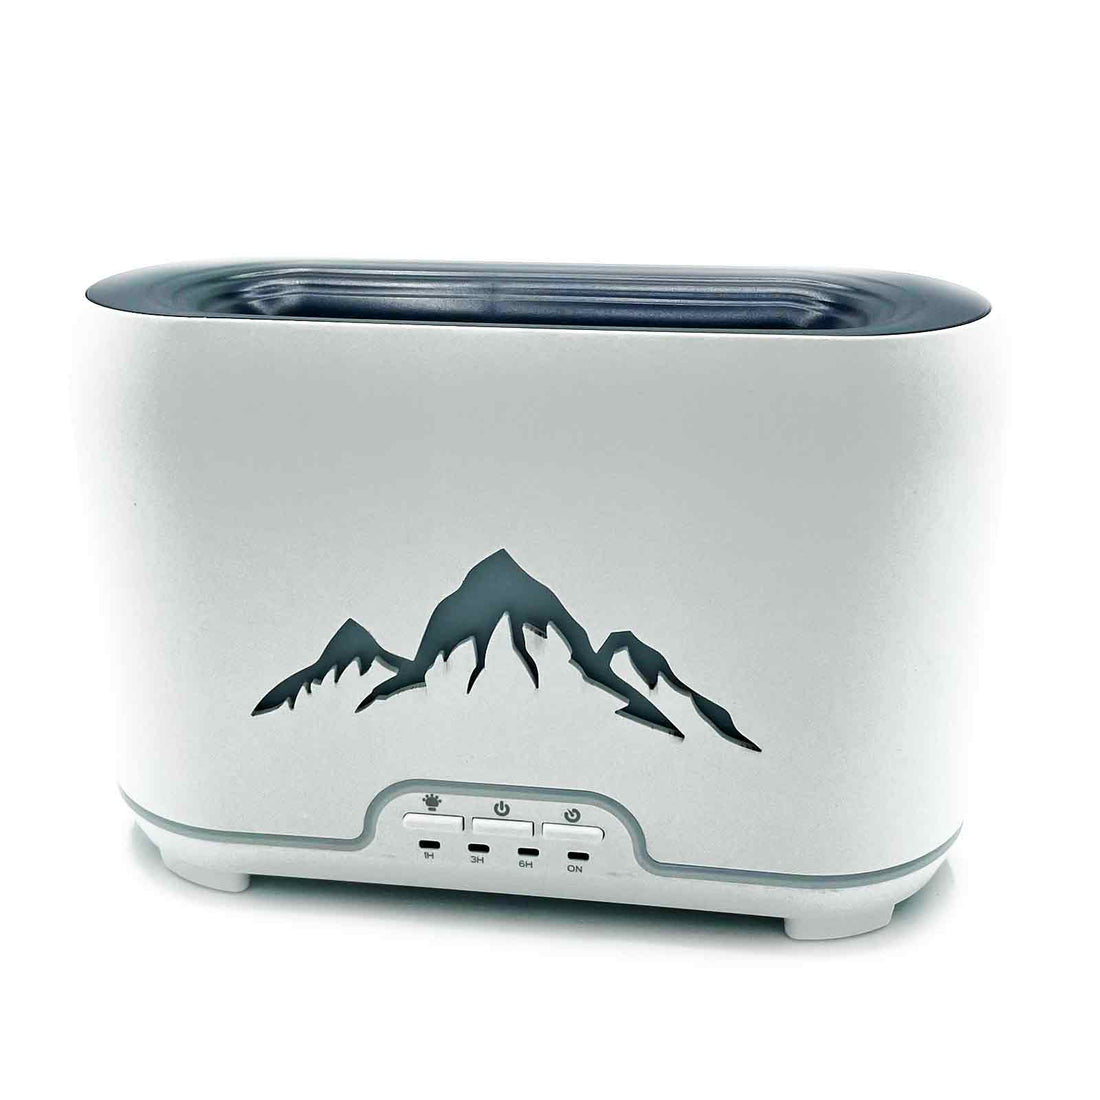 Himalayas Aroma Diffuser - USB-C - Remote control - Flame Effect